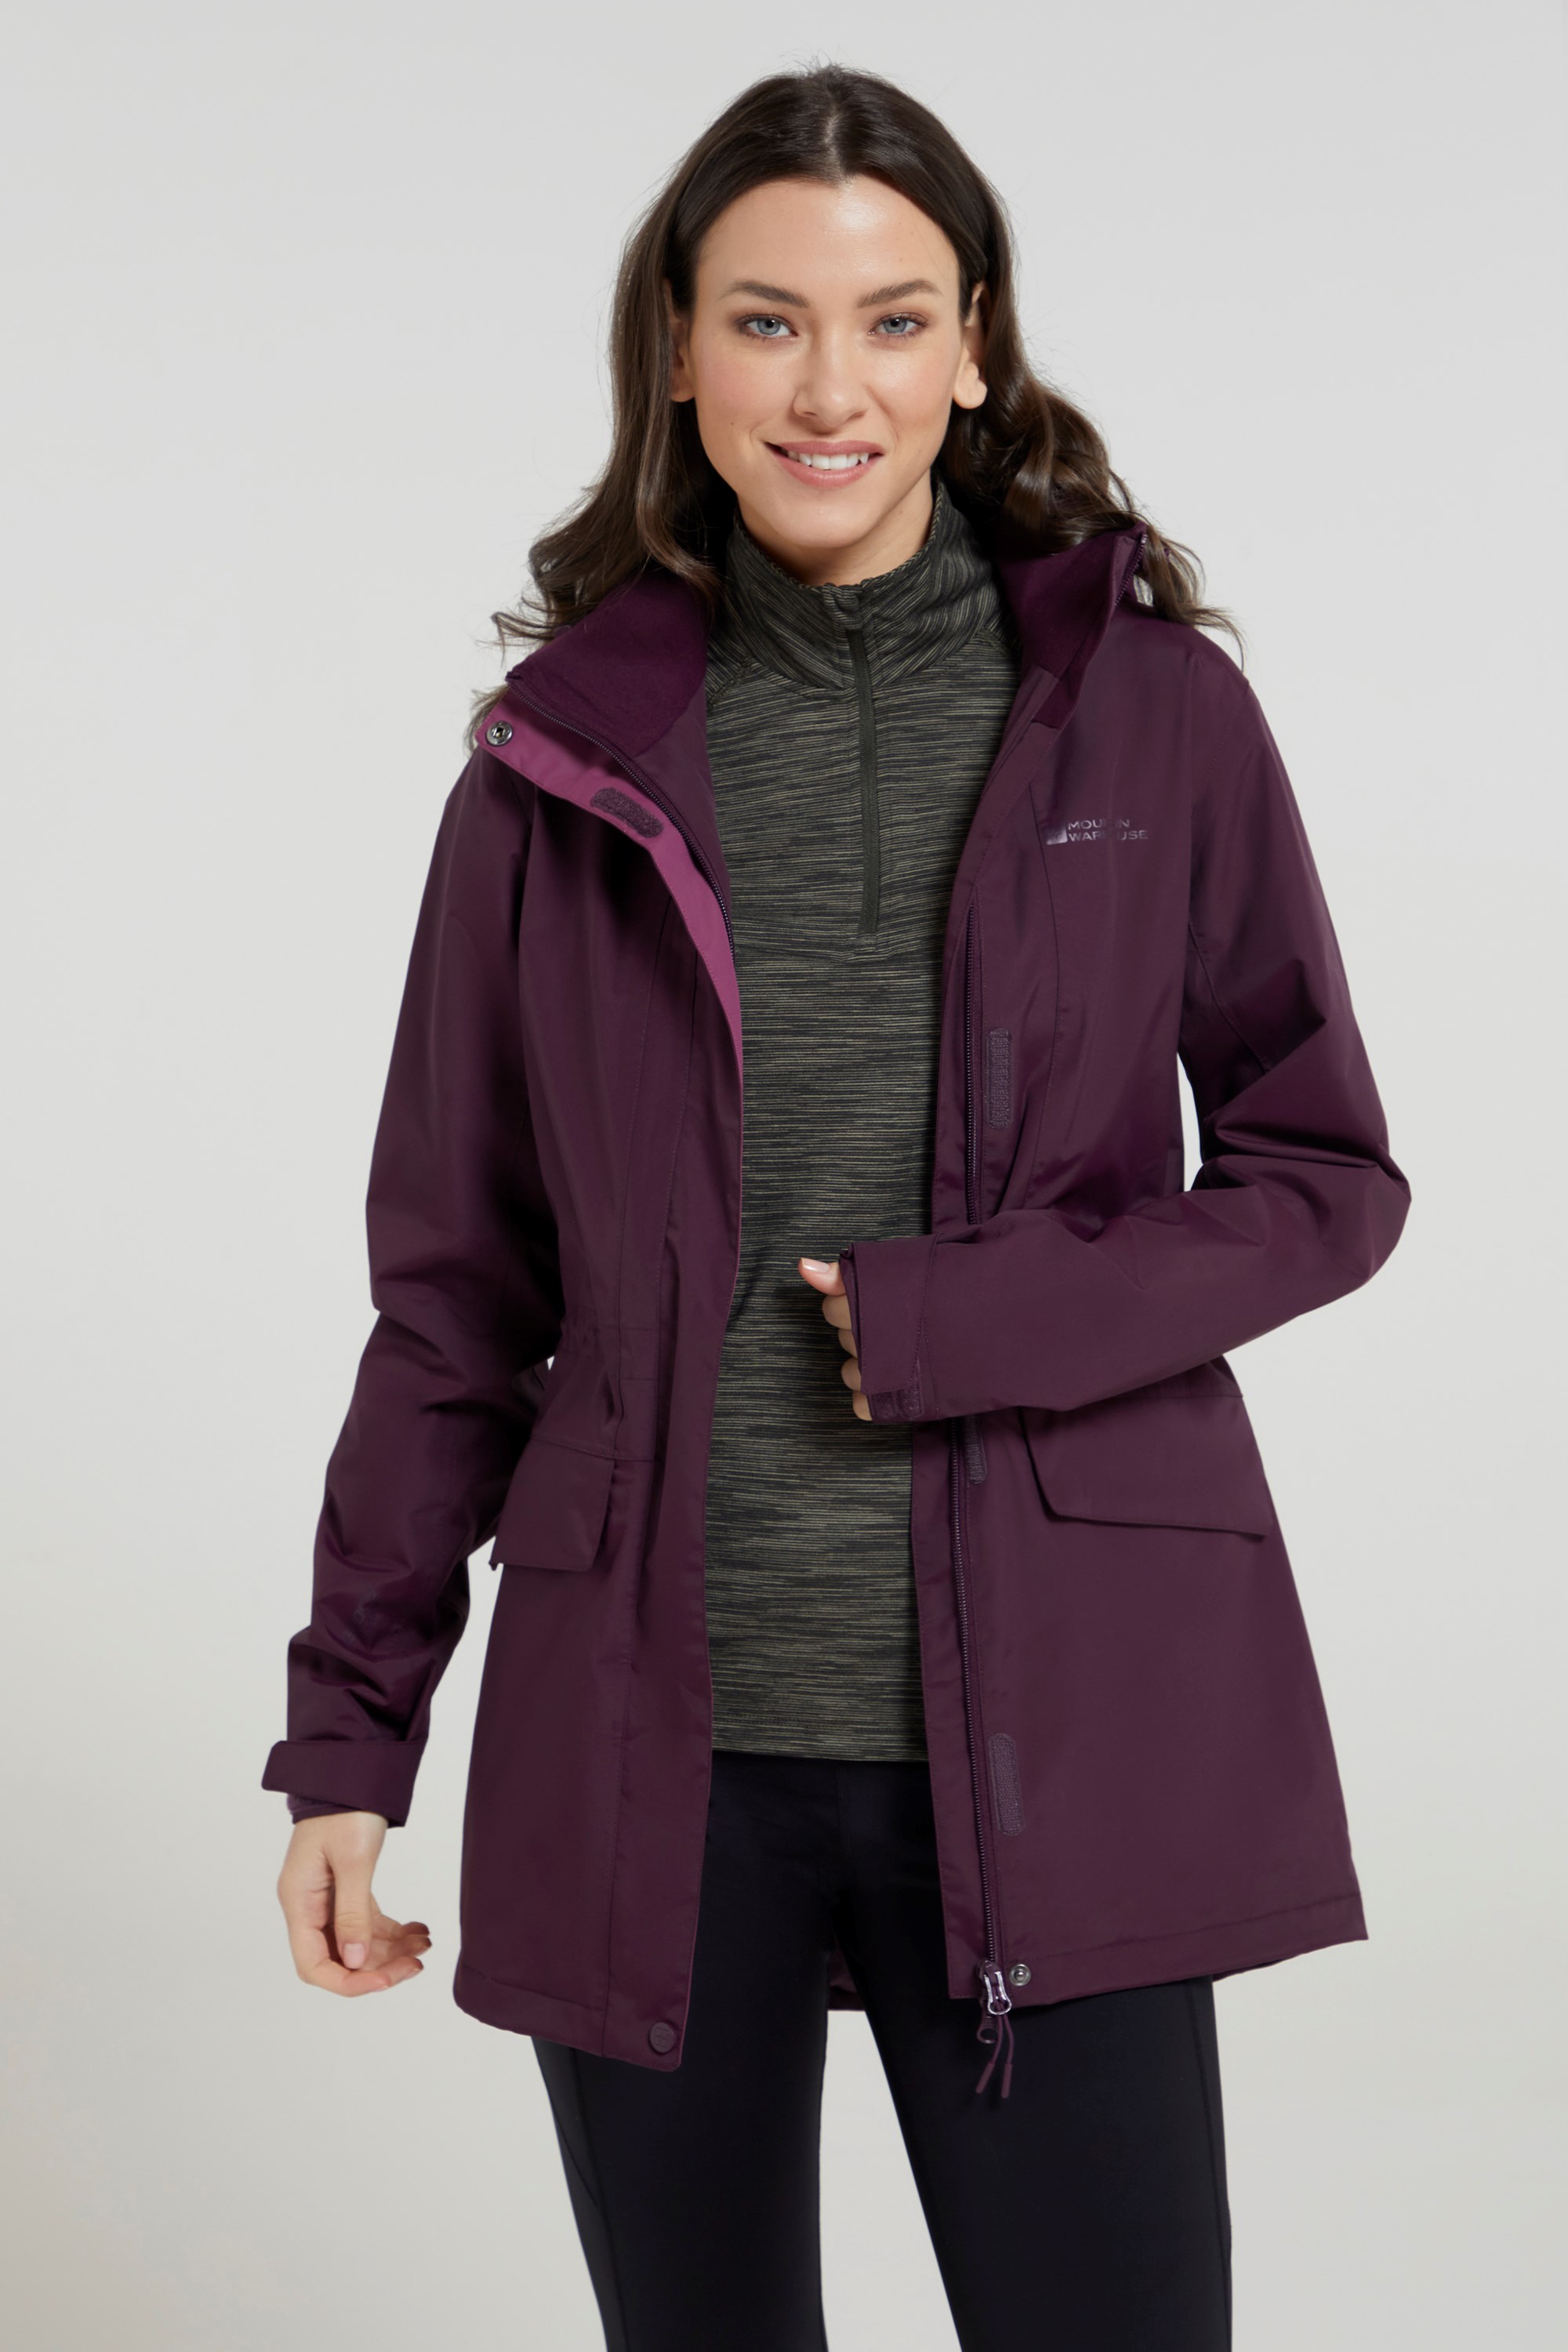 Craghoppers Women's ExpoLite Insulated Jacket - Drifters Adventure Centre